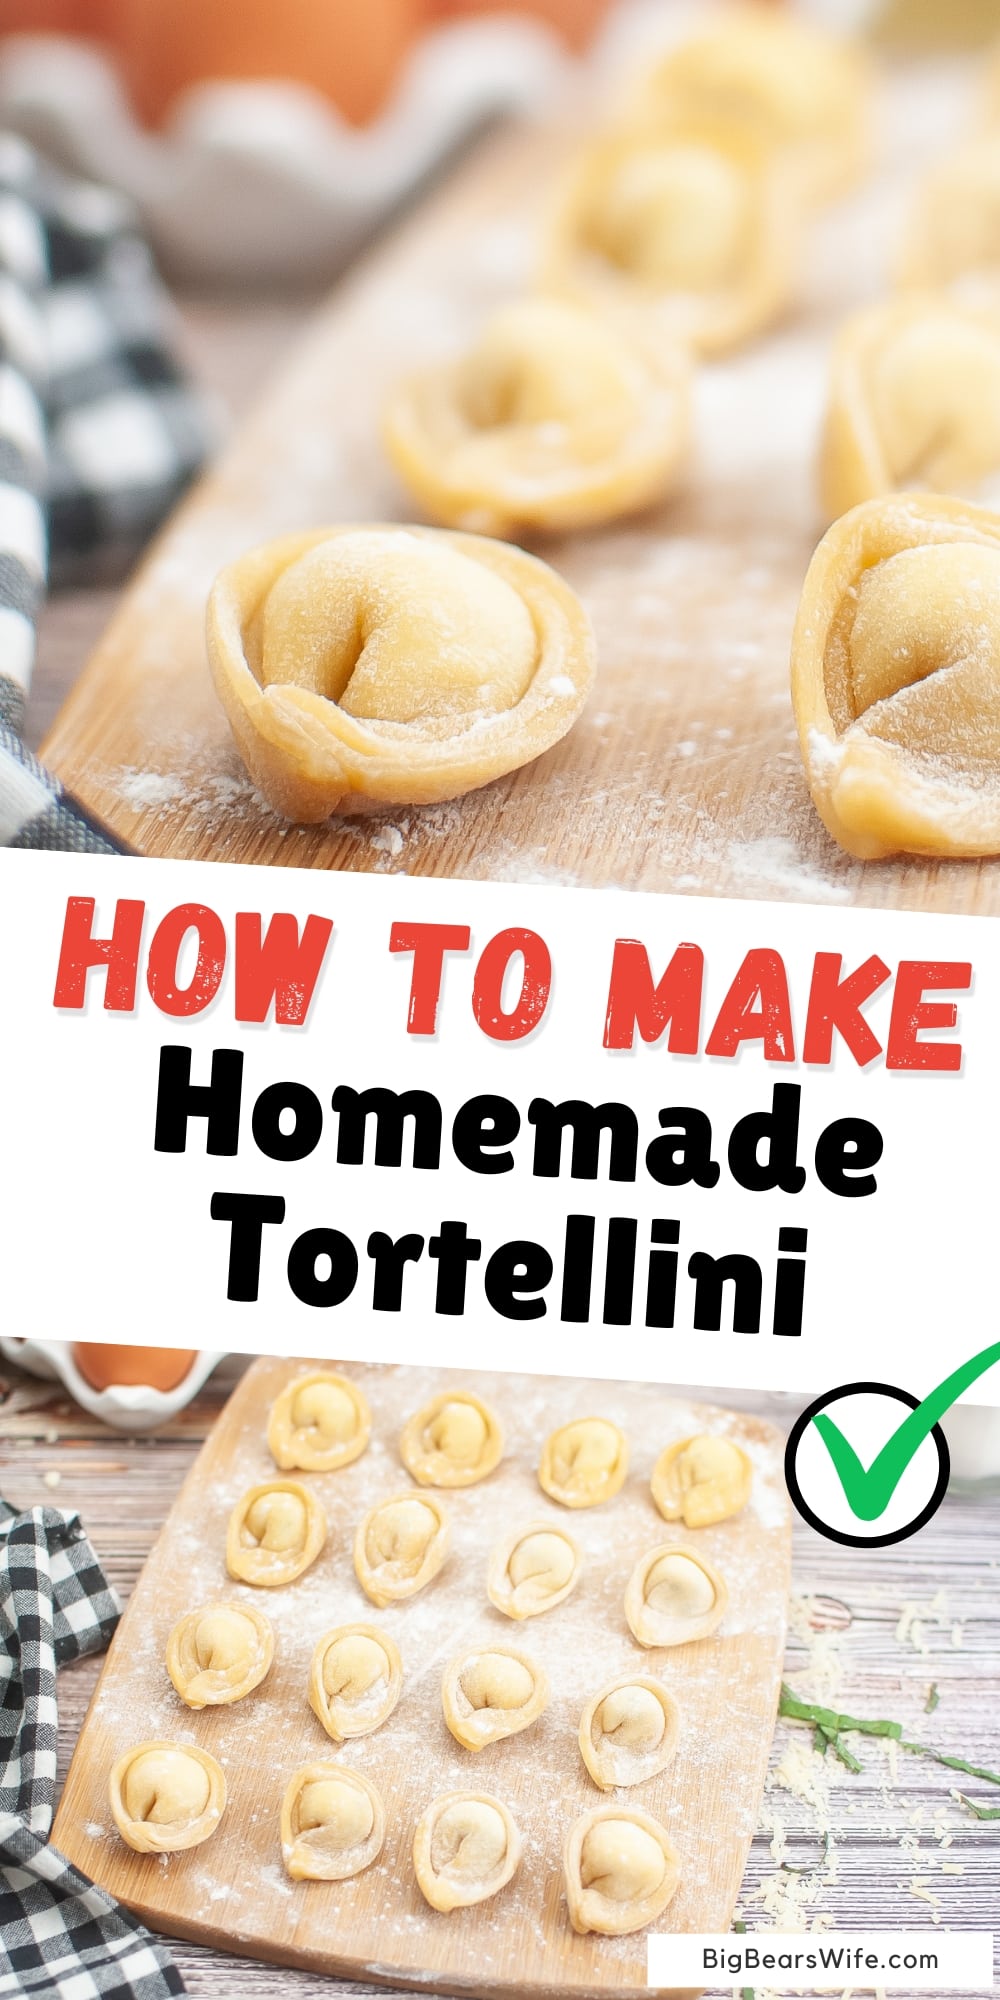 Want to learn How To Make Homemade Tortellini? Let me show you how to make homemade tortellini pasta that you can use in all kinds of recipes. via @bigbearswife